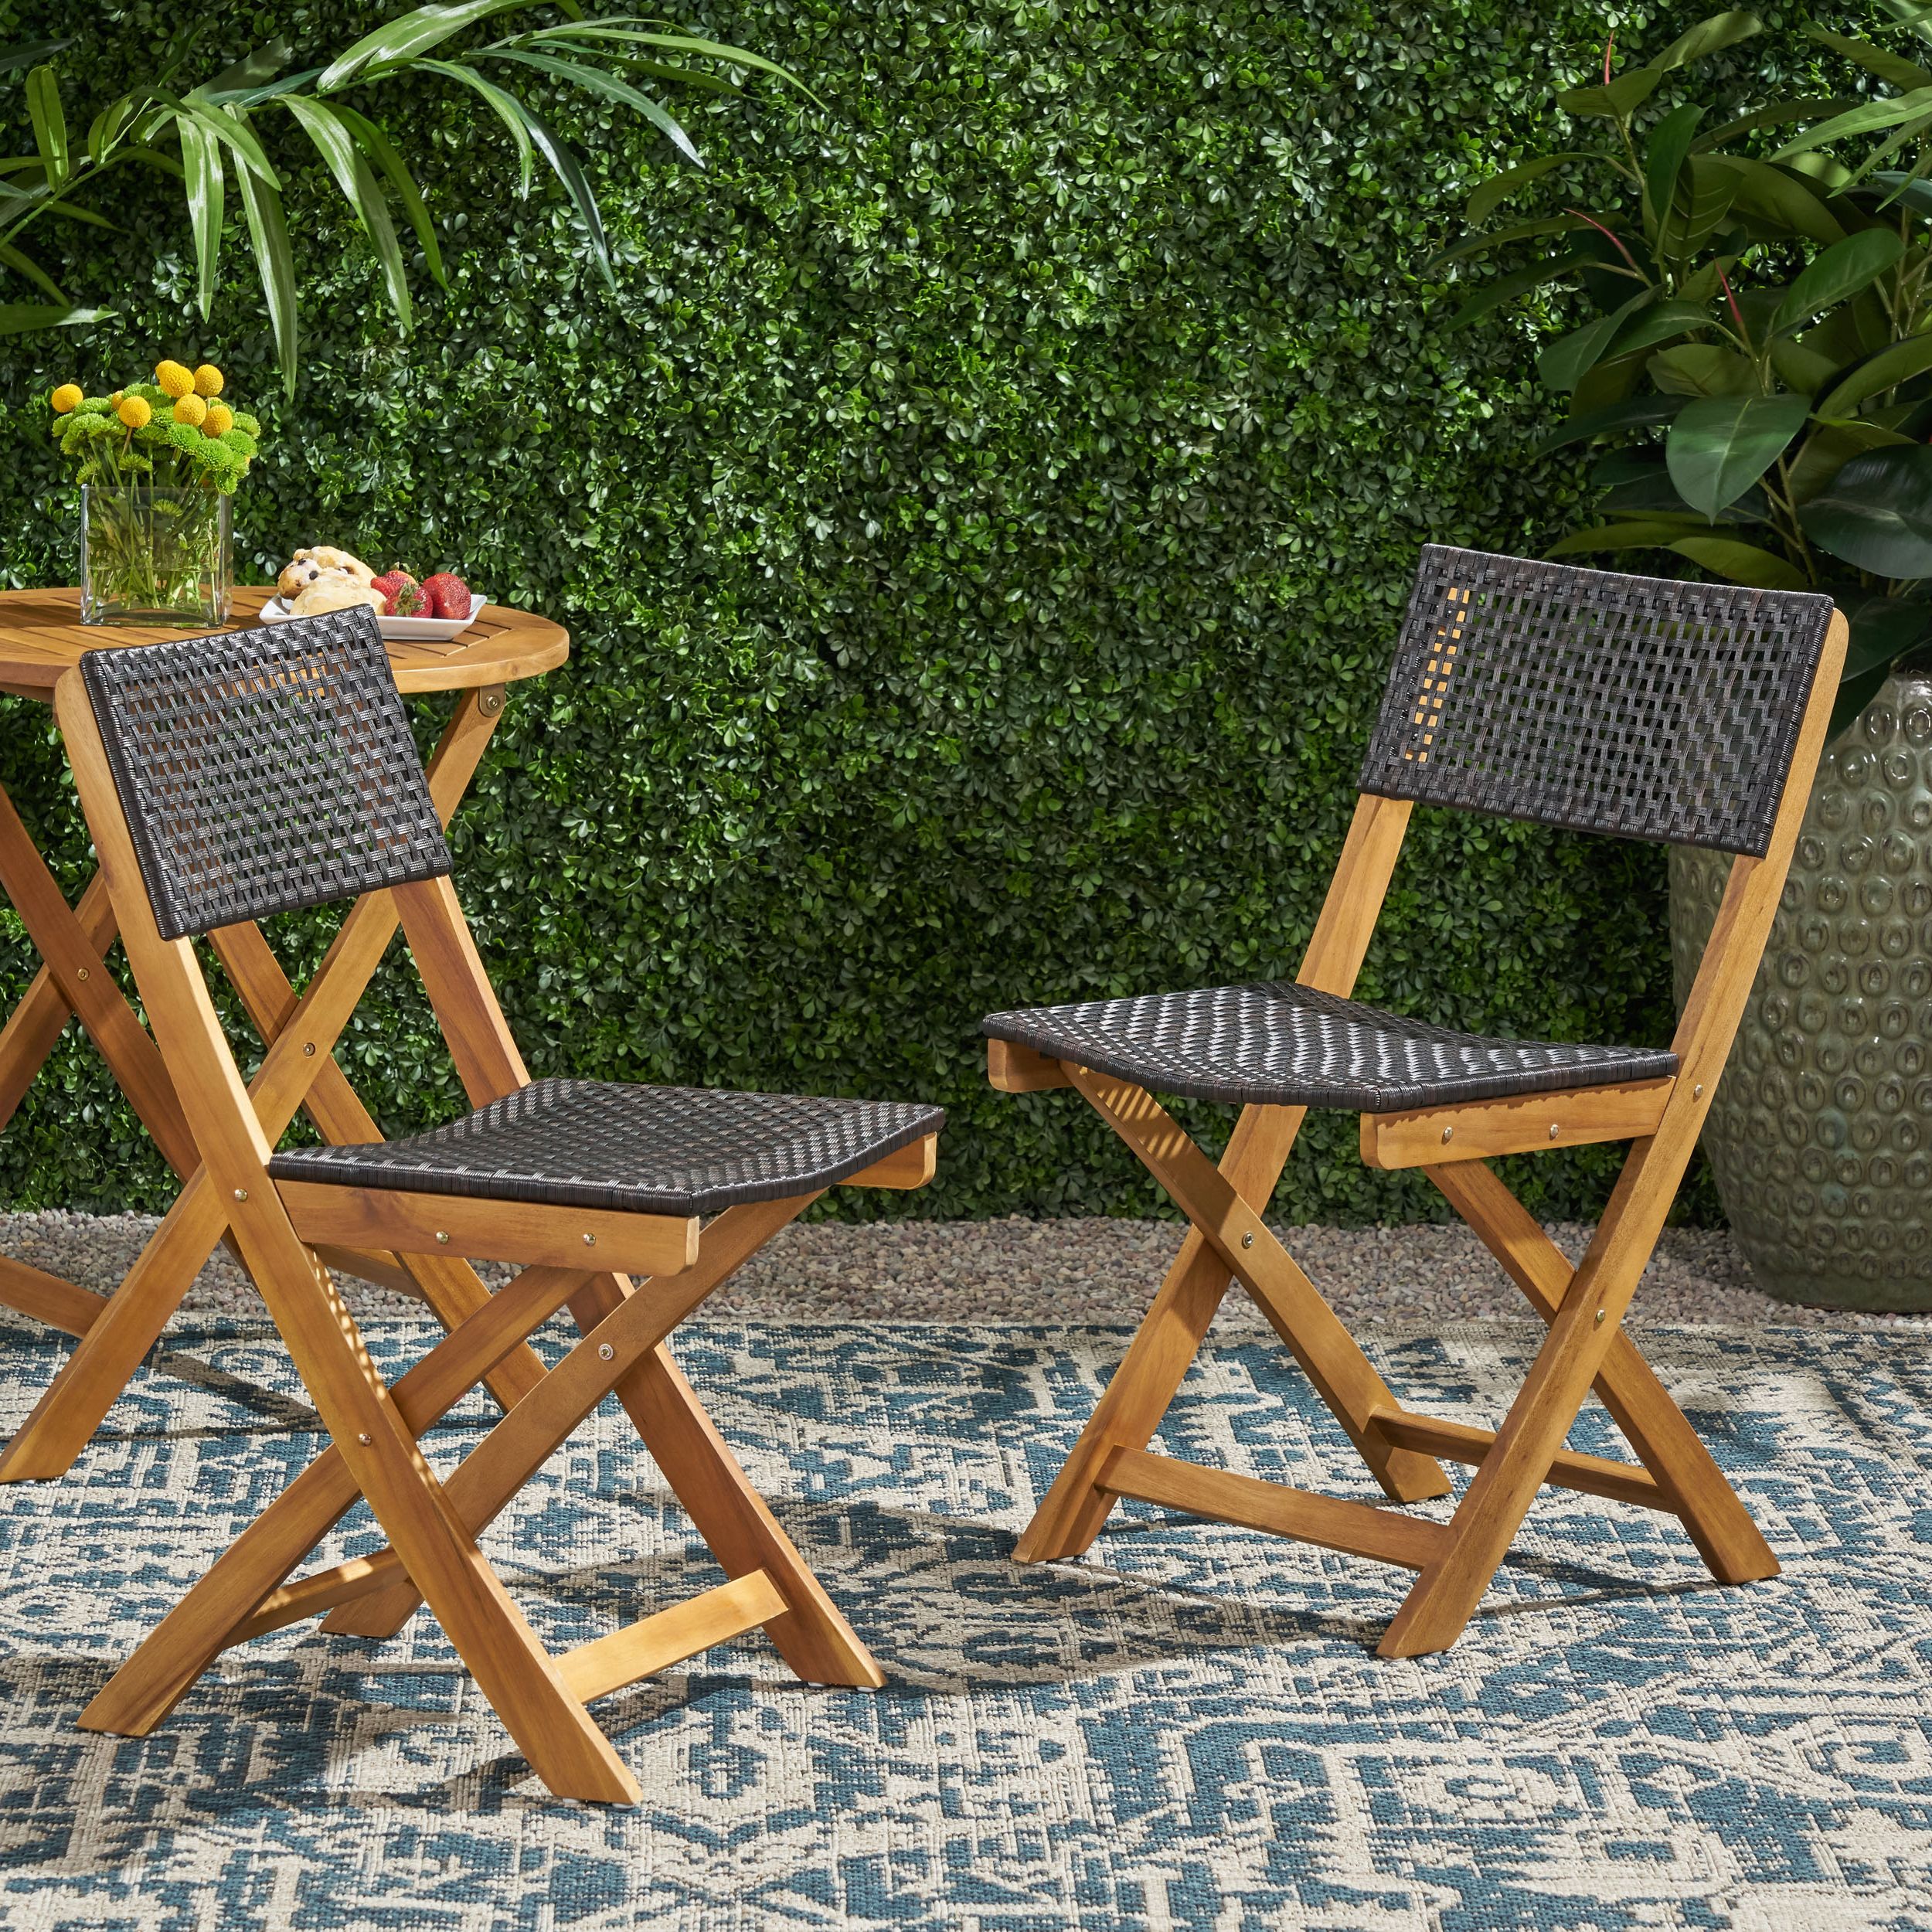 Preferred Wood Outdoor Armchair Sets In Maison Outdoor Acacia Wood Foldable Bistro Chairs With Wicker Seating (View 3 of 15)